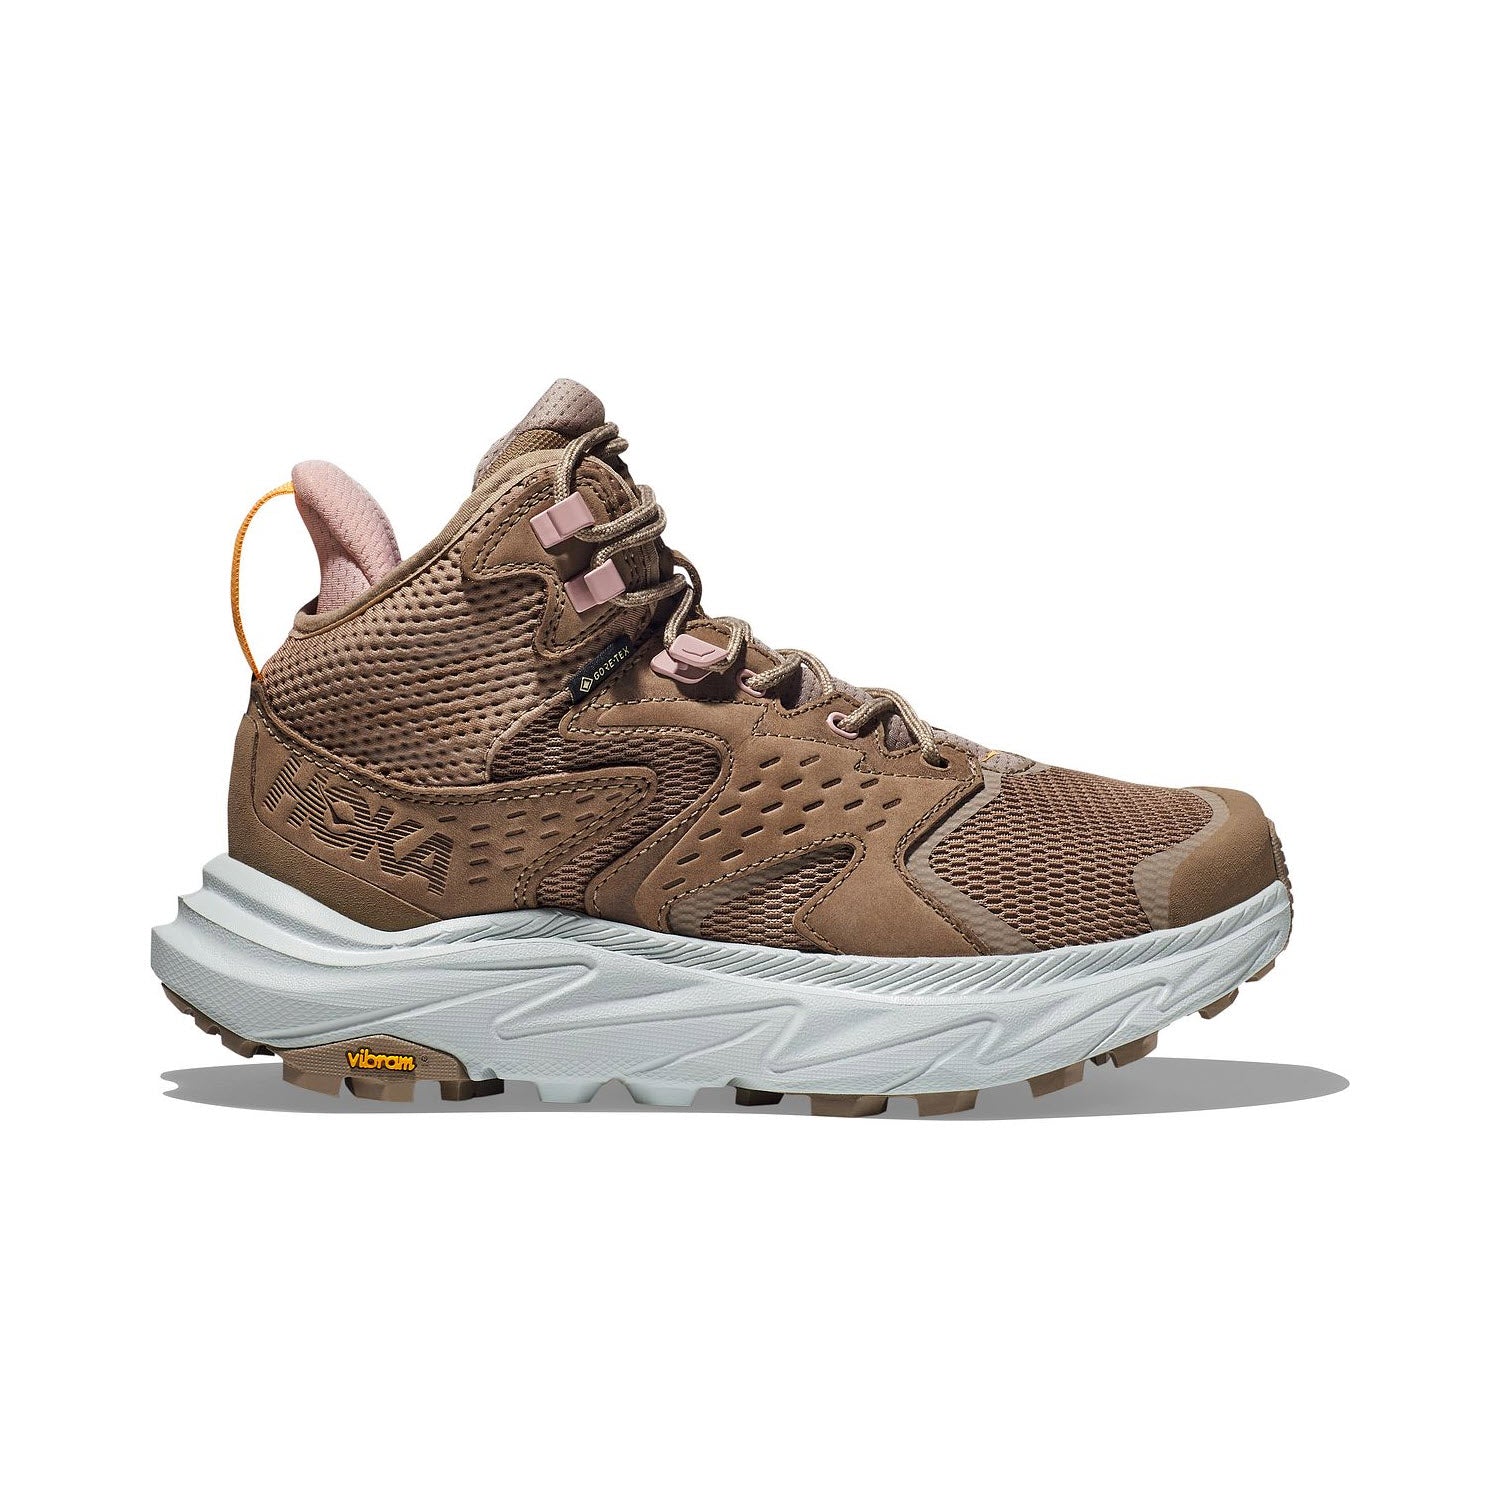 Hoka hiking boot with a ventilated upper, lace-up front, and a small pull tab on the heel, isolated on a white background.